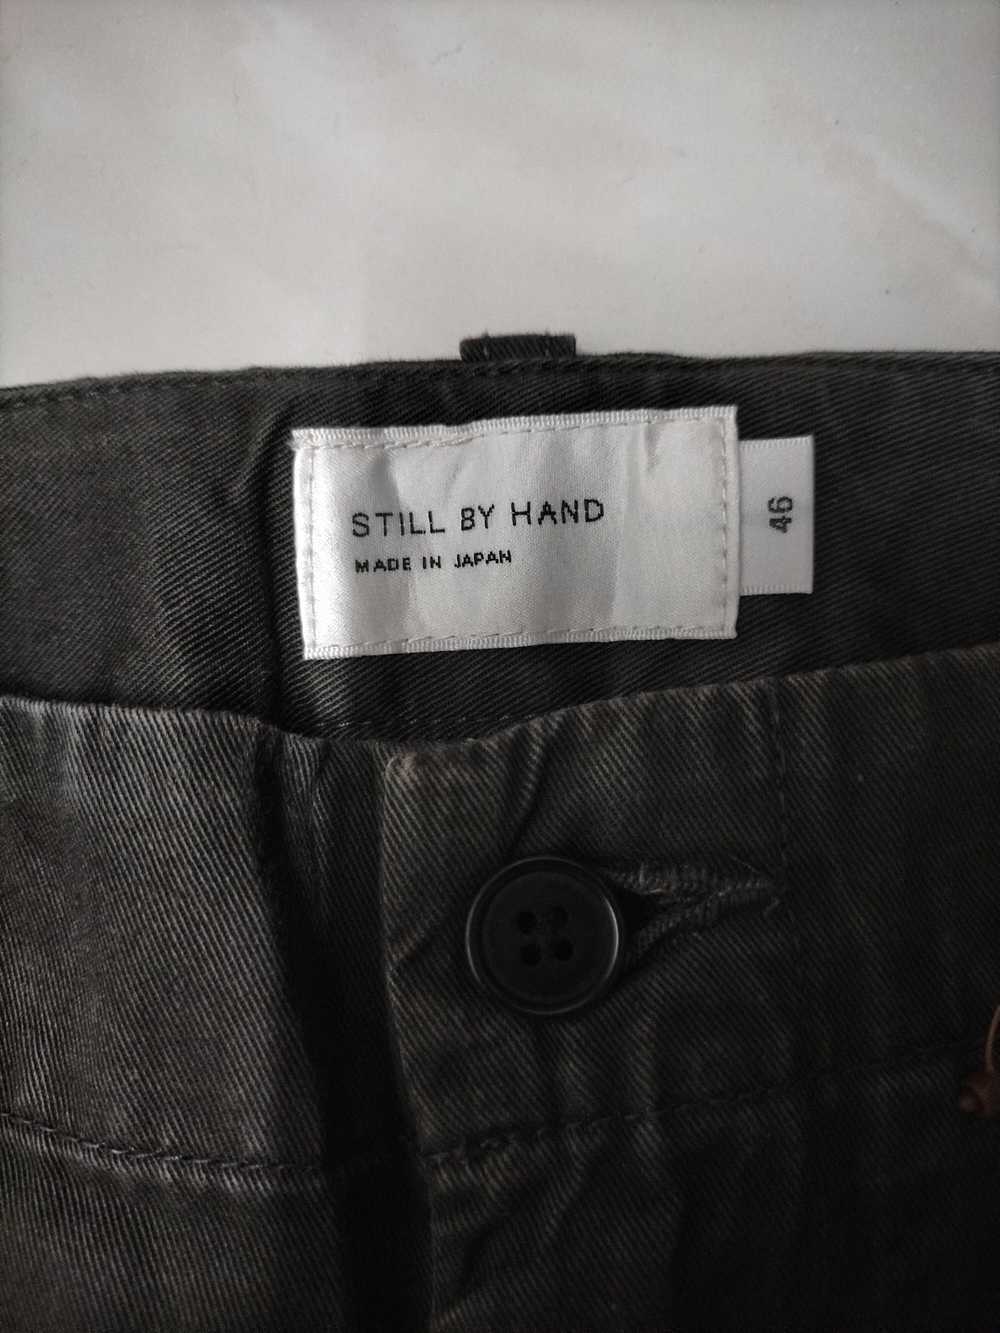 Still By Hand Still By Hand Pants - image 5